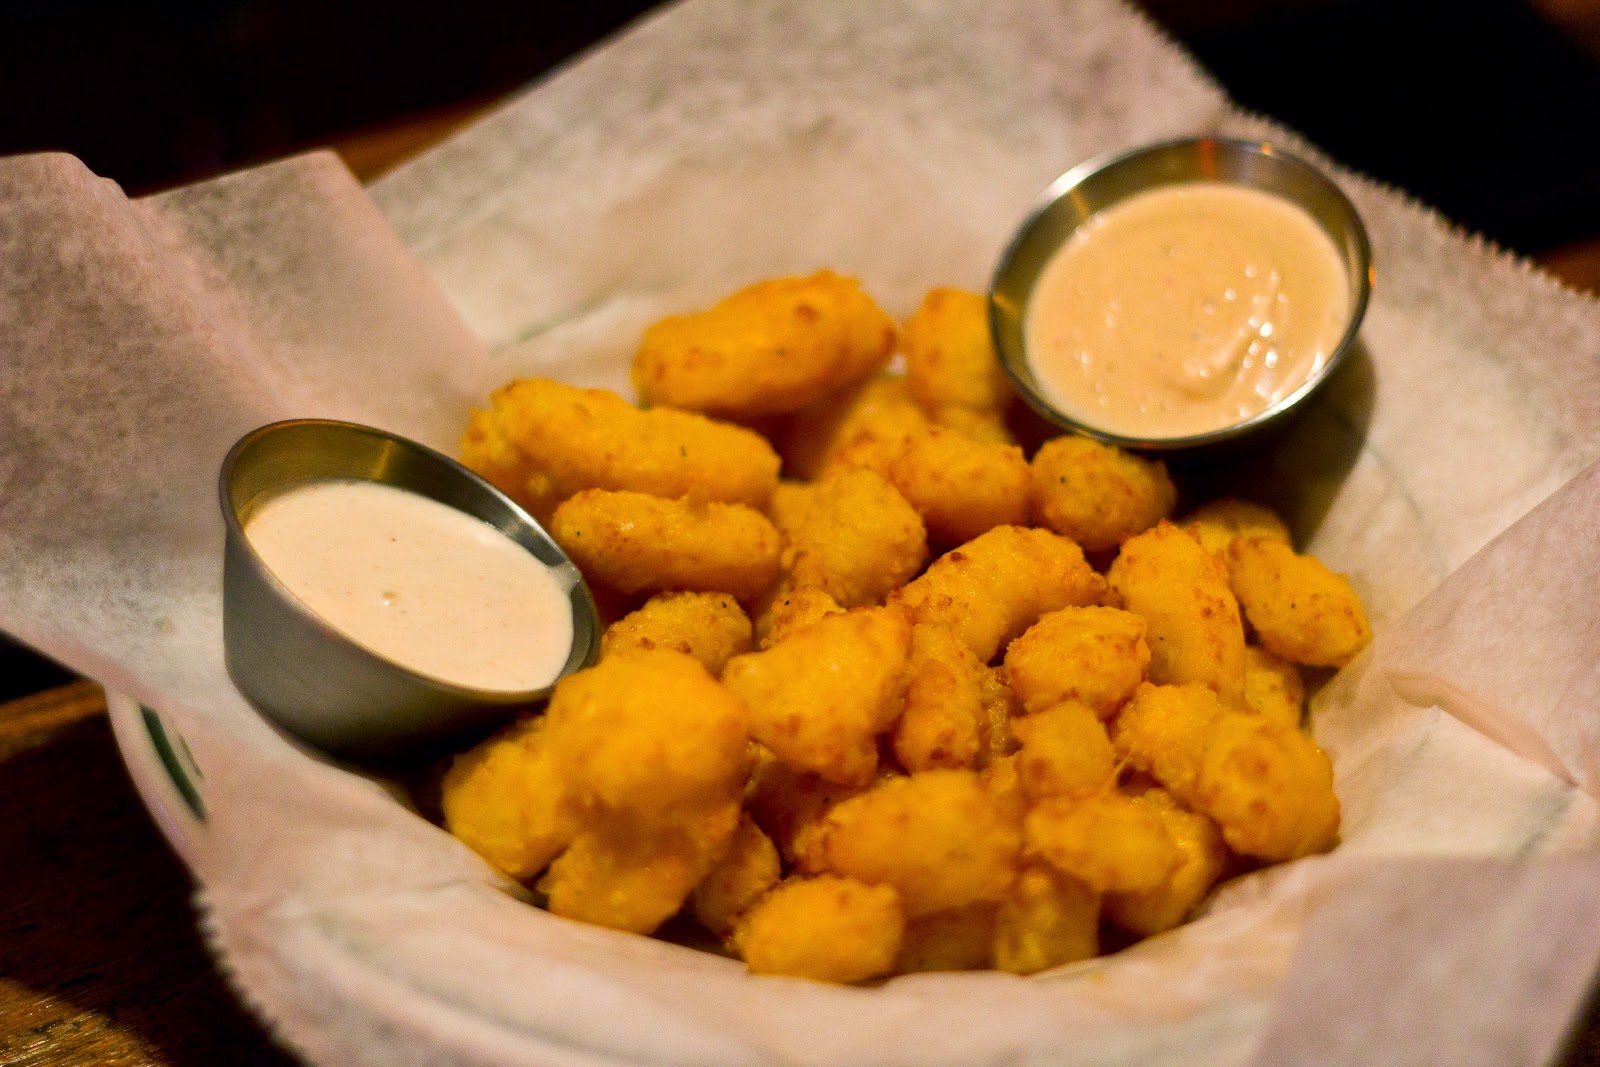 http://cheeseunderground.blogspot.com/2012/10/the-downtown-madison-deep-fried-cheese.html